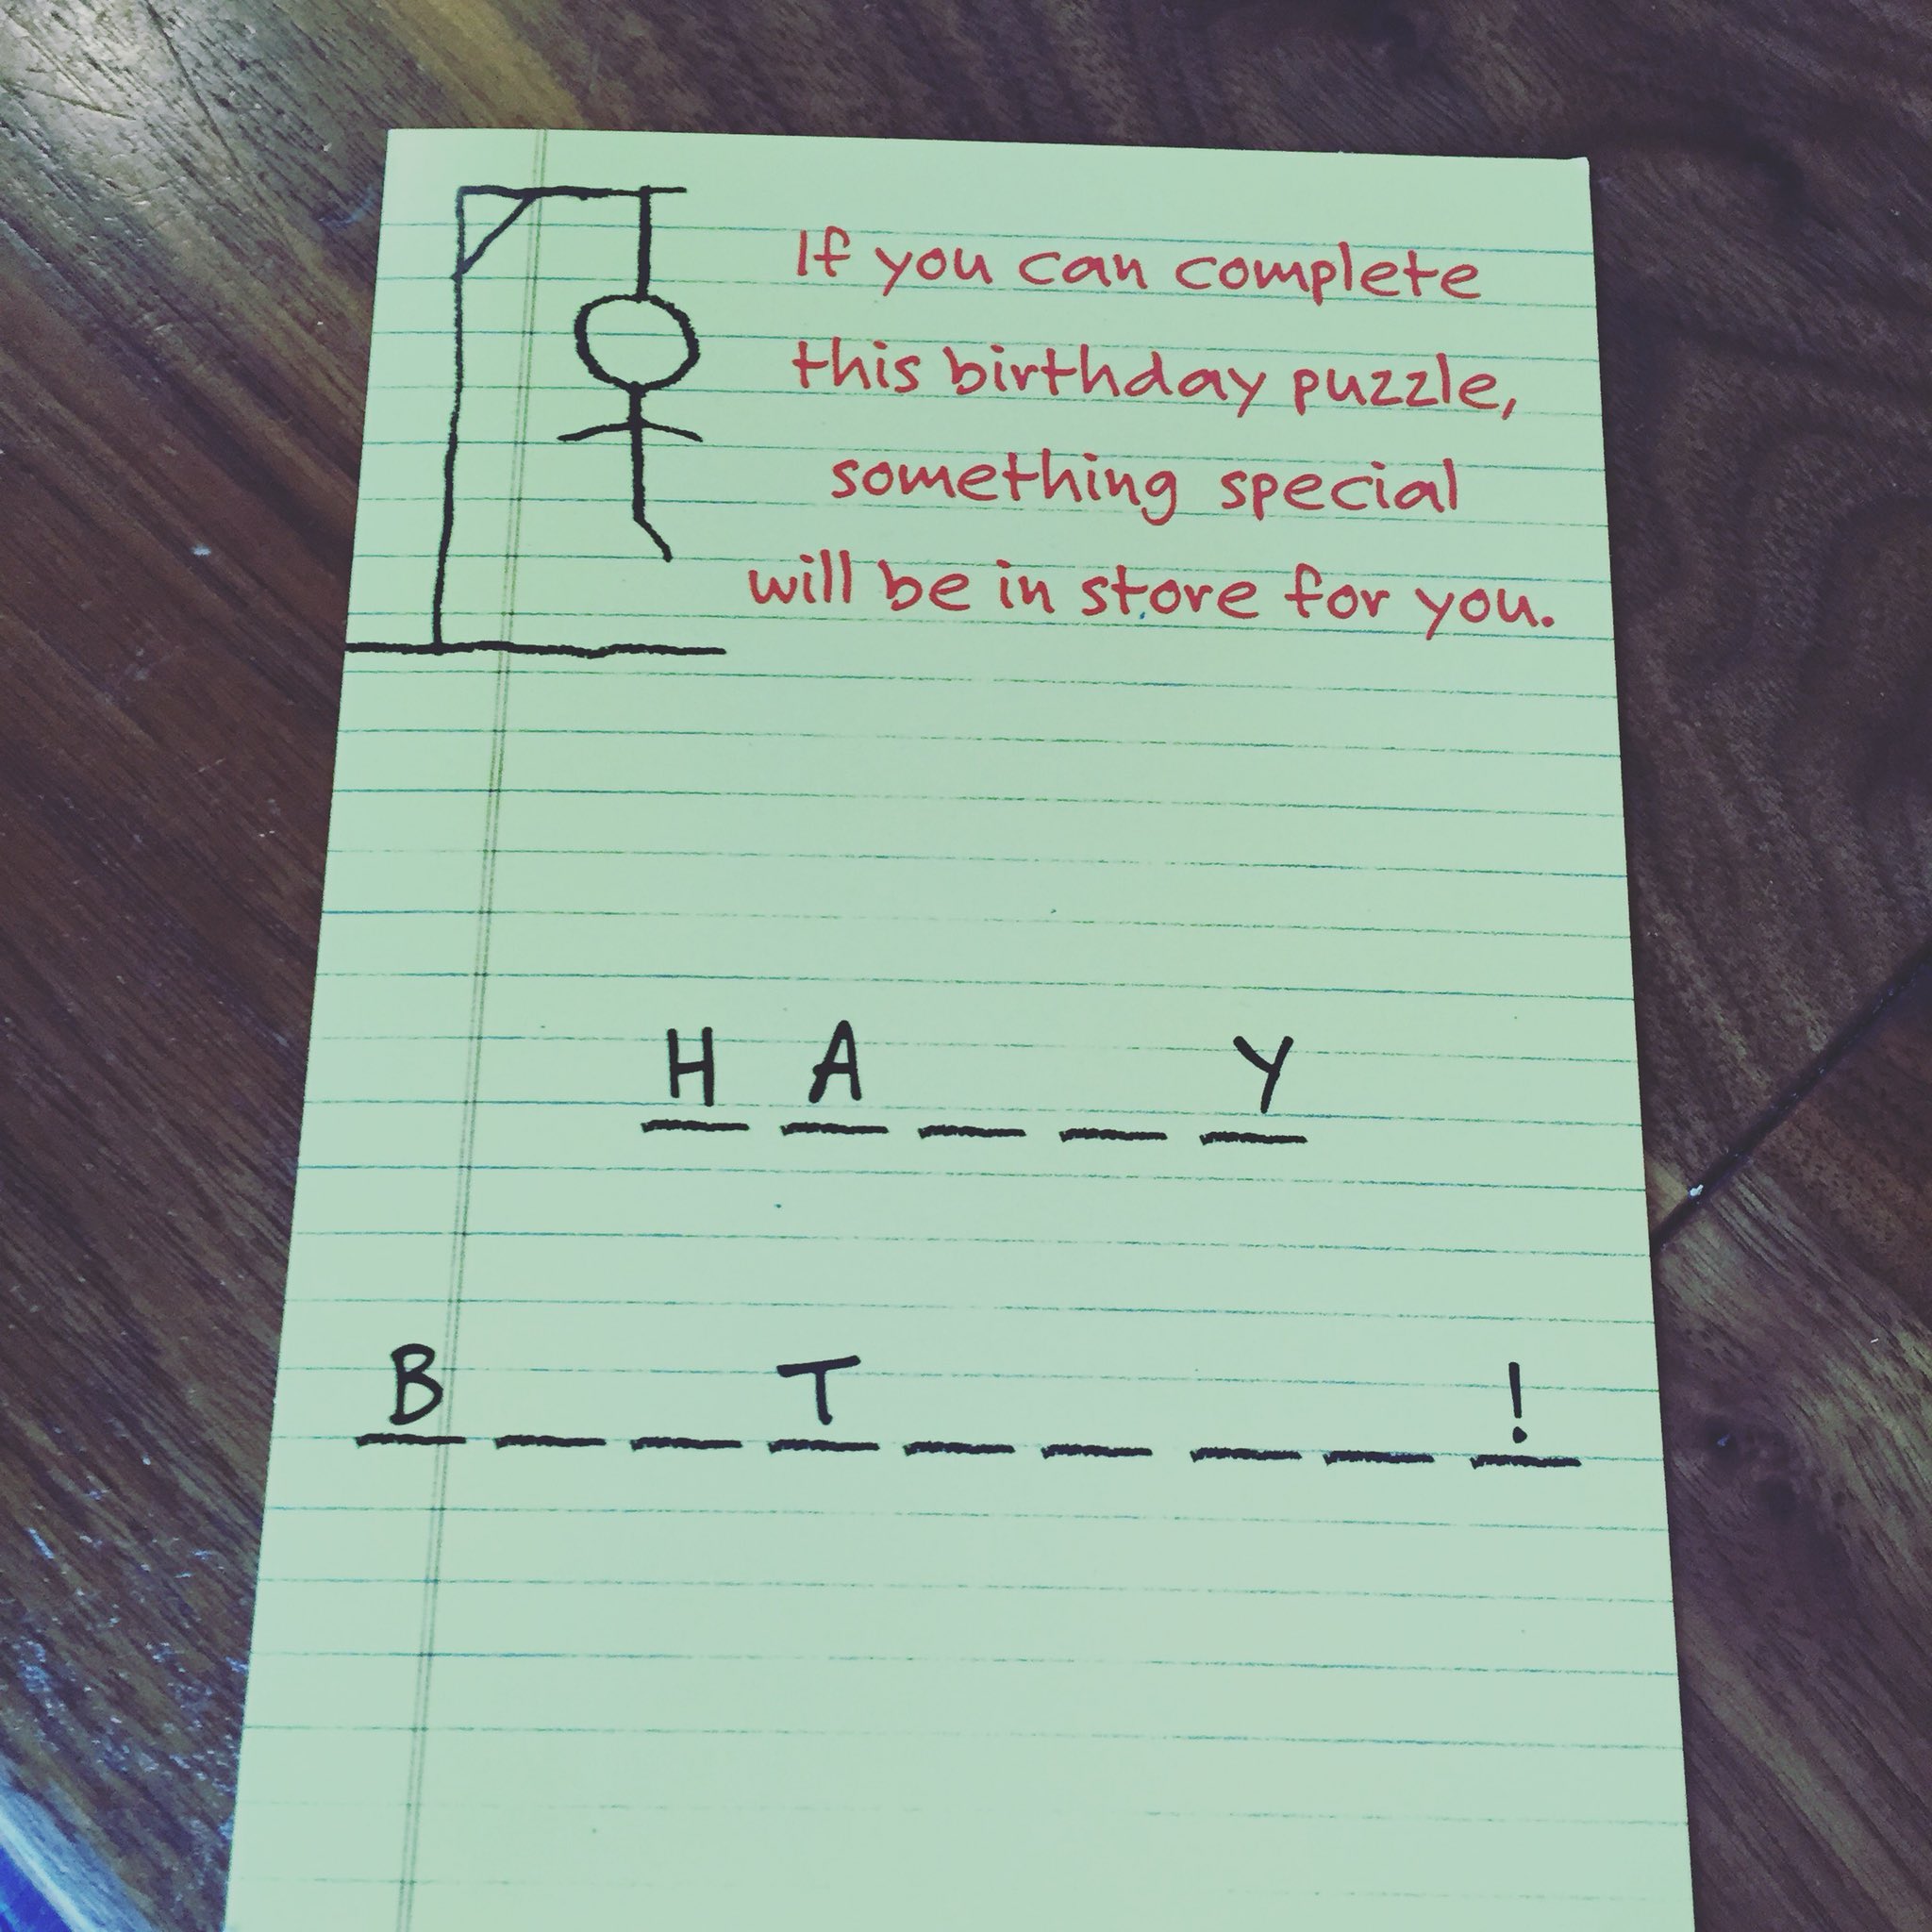 Ryan Taerk on "Front of my Try and guess what it spells? #hangman #birthday #card #game #follow4follow #like4like https://t.co/S1XlFYbXBN" / Twitter